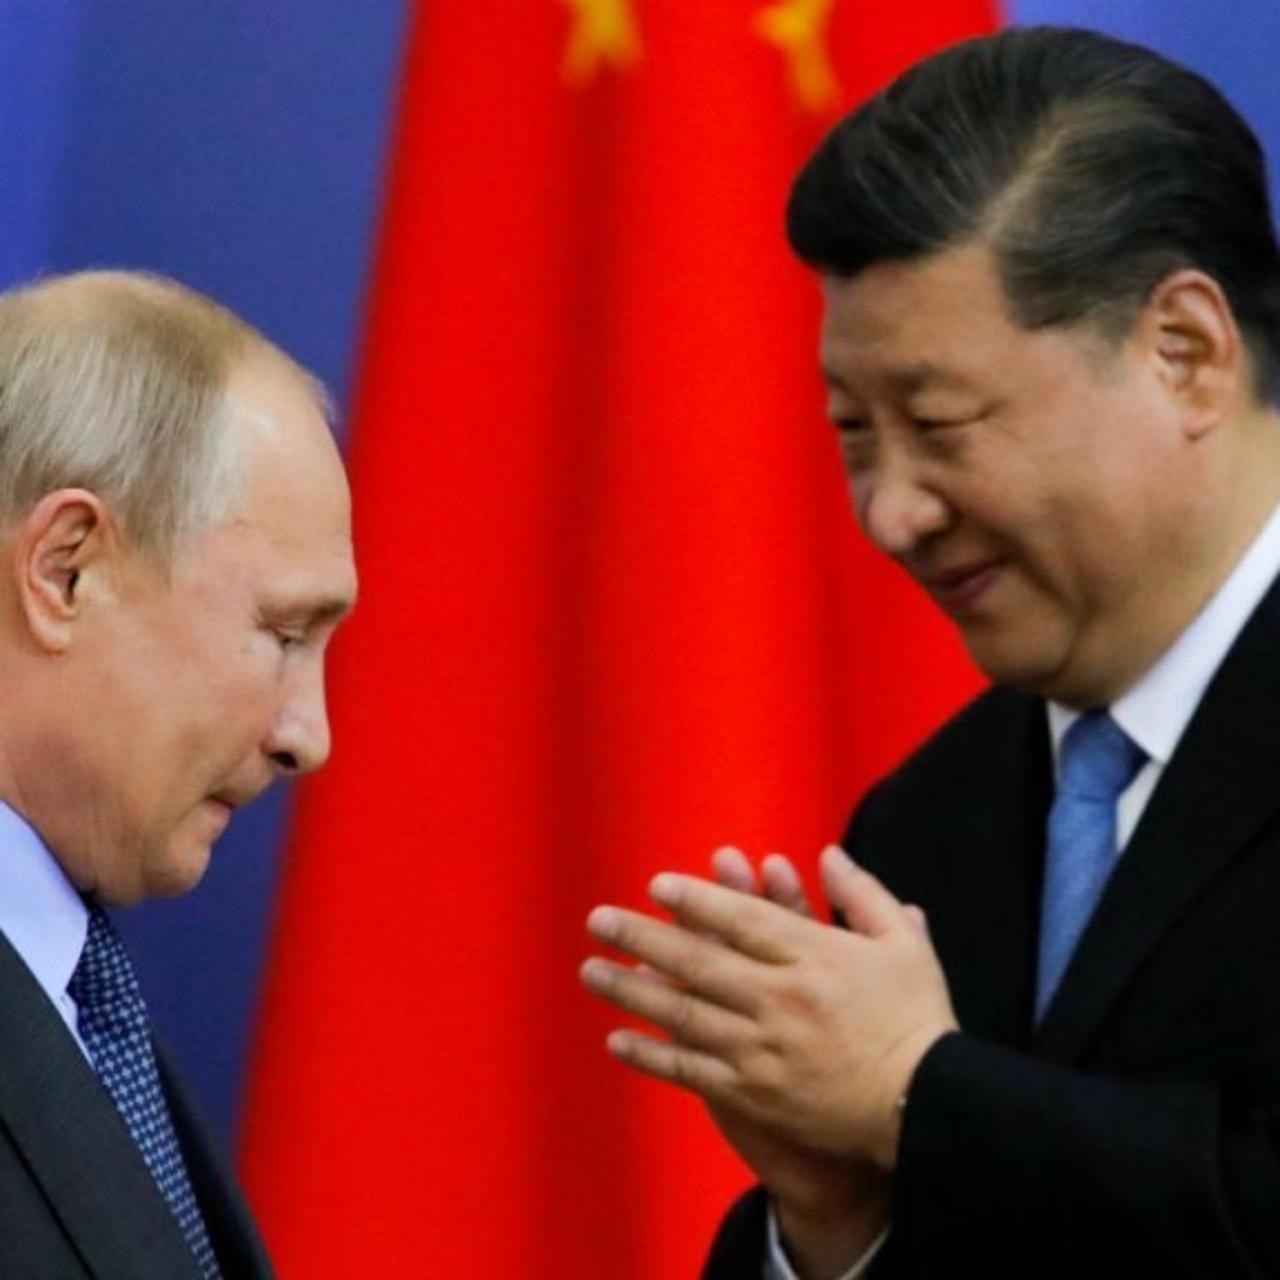 Hot Arctic, the complex partnership between China and Russia